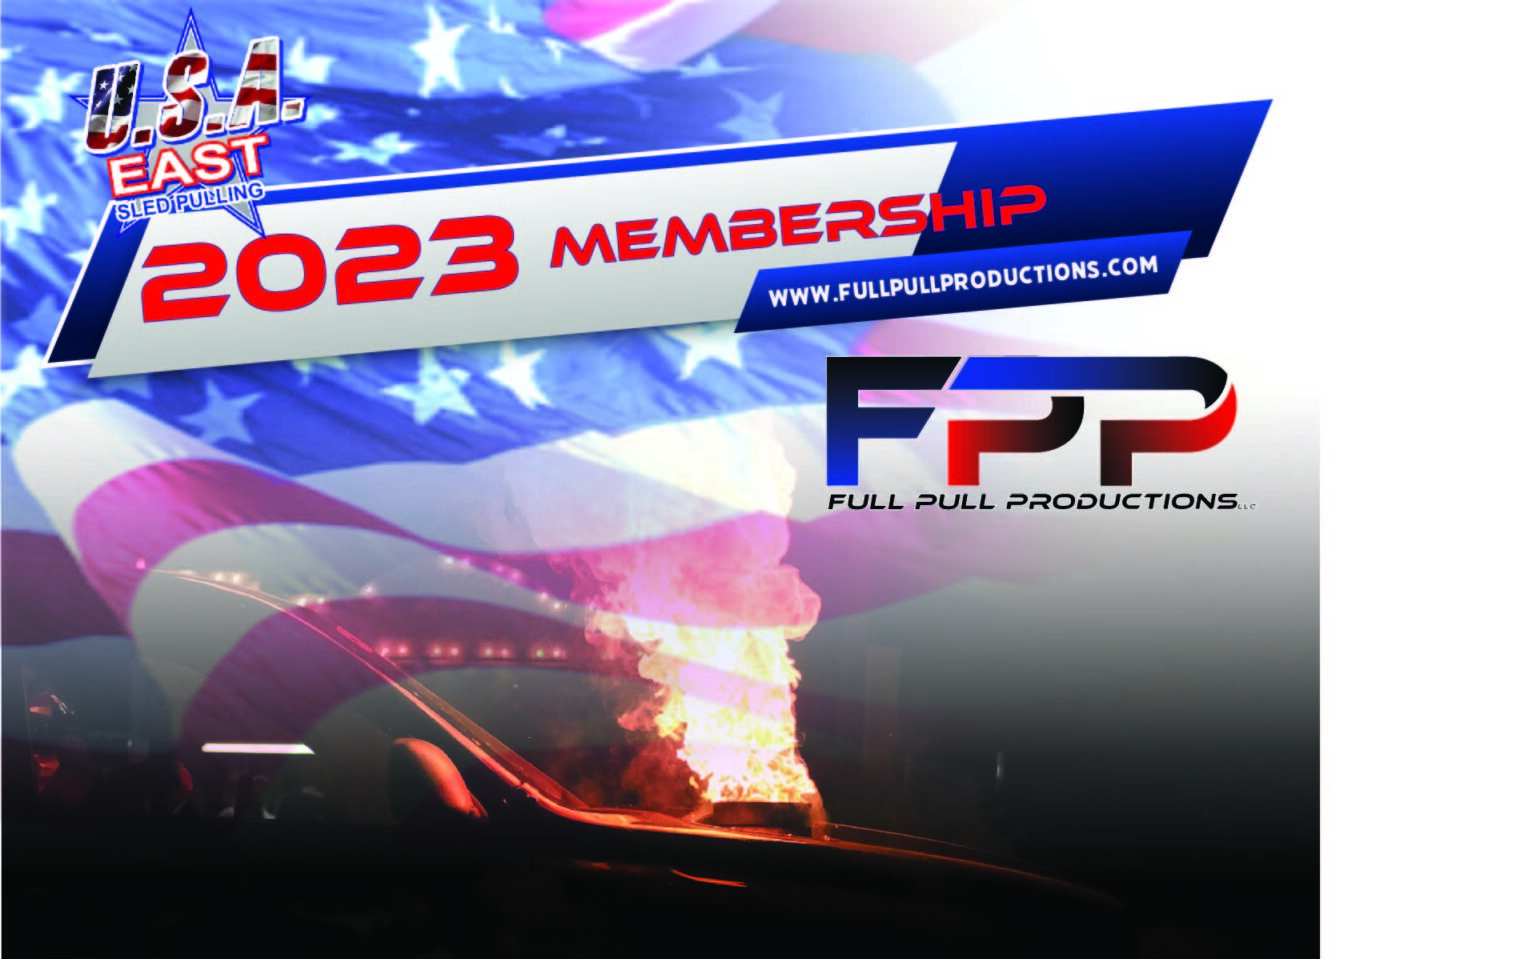 2023 Membership is now available. Full Pull Productions LLC